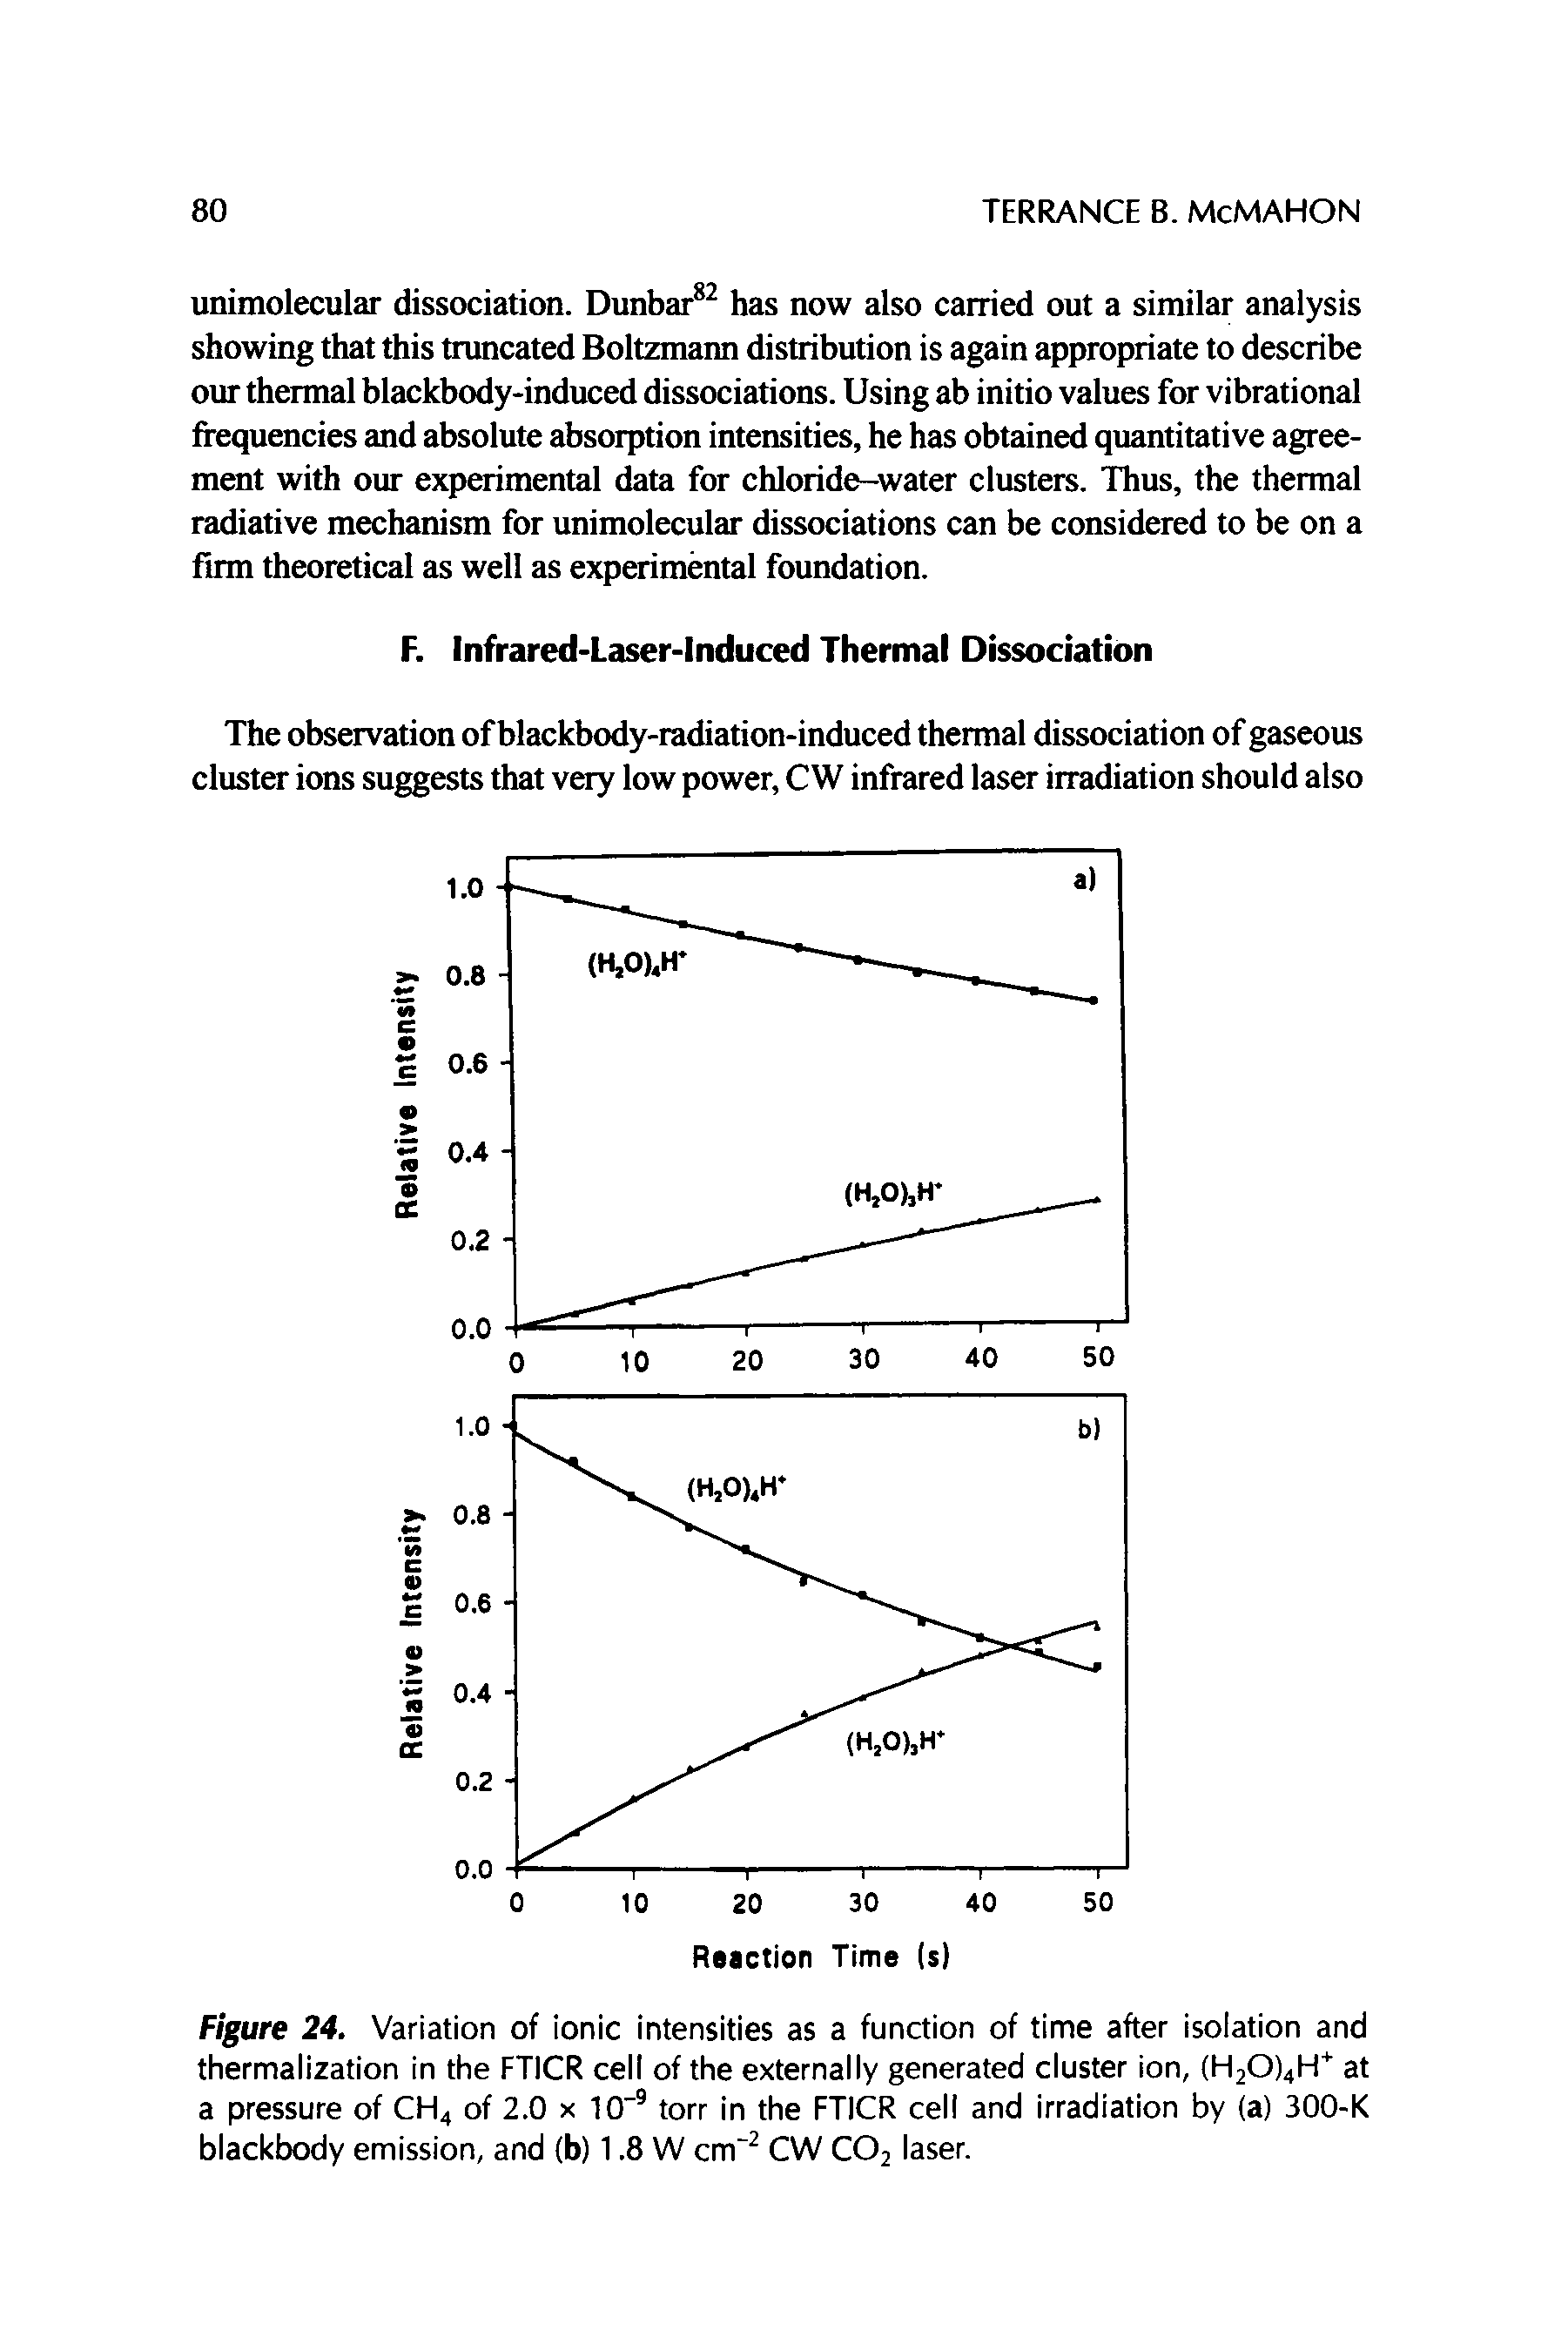 Figure 24. Variation of ionic intensities as a function of time after isolation and thermalization in the FTICR cell of the externally generated cluster ion, (H20)4H at a pressure of CH4 of 2.0 x 10 torr in the FTICR cell and irradiation by (a) 300-K blackbody emission, and (b) 1.8 W cm" CW CO2 laser.